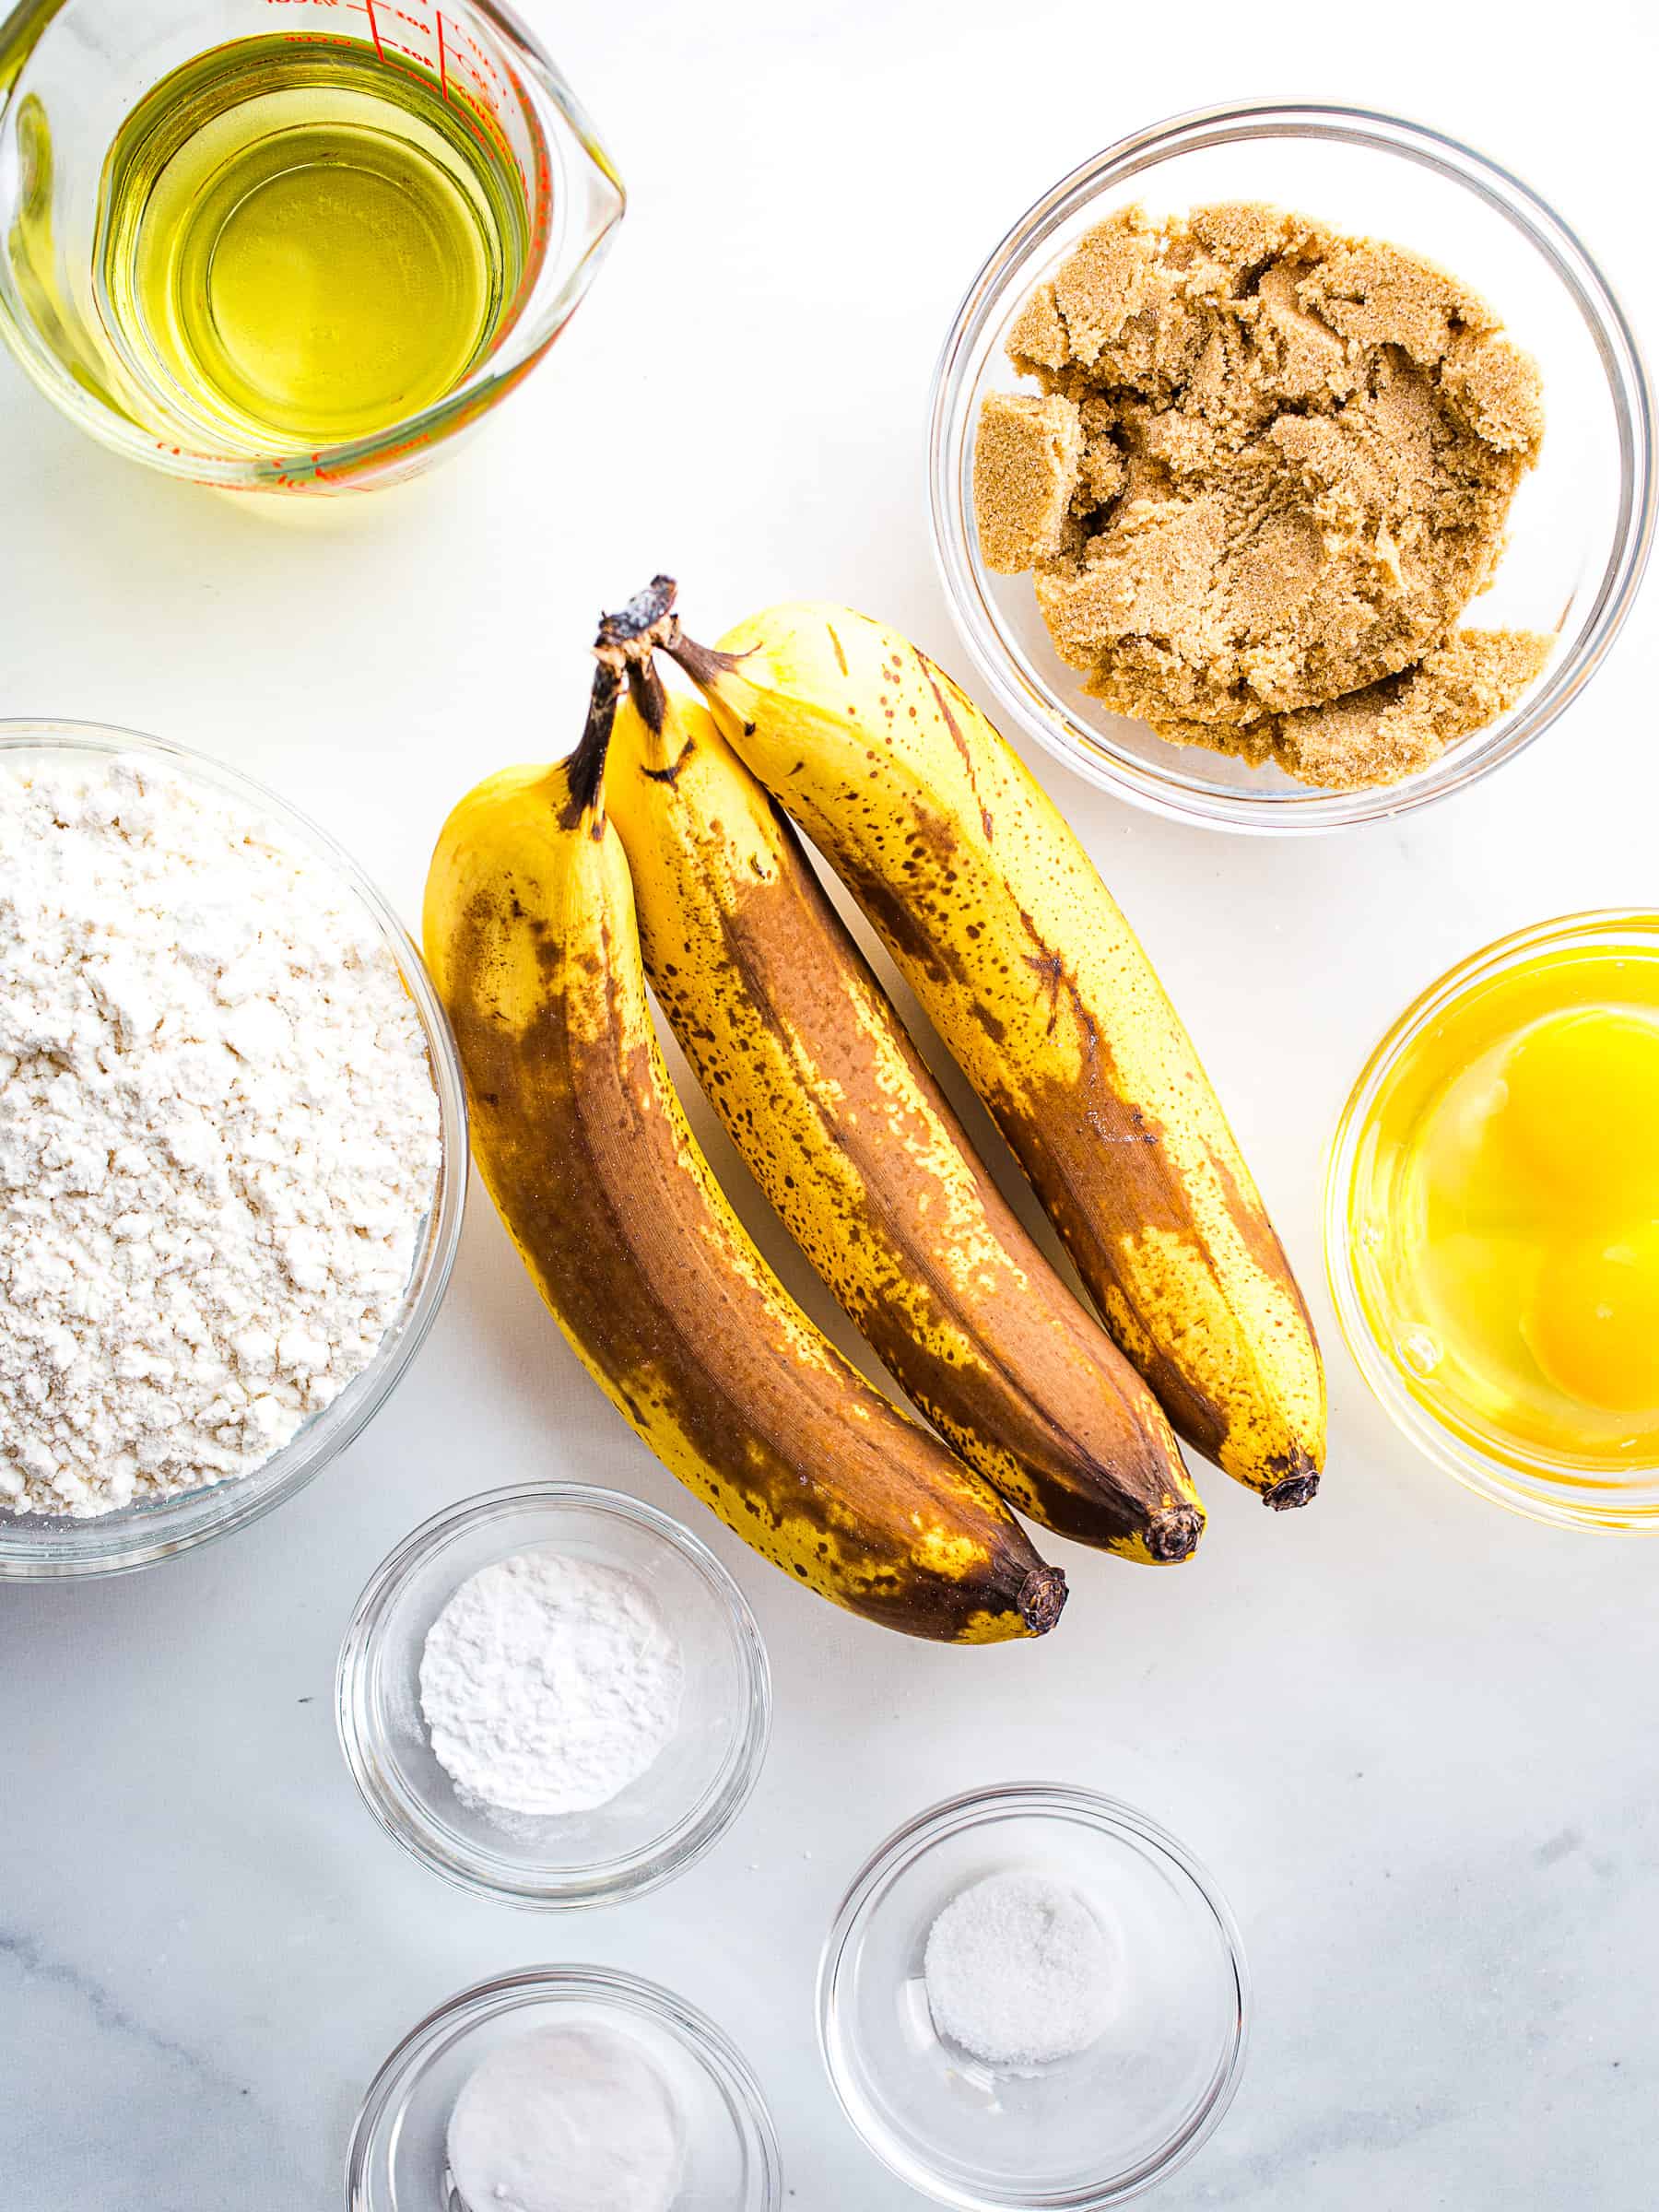 Ingredients for gluten-free banana muffins on the counter.